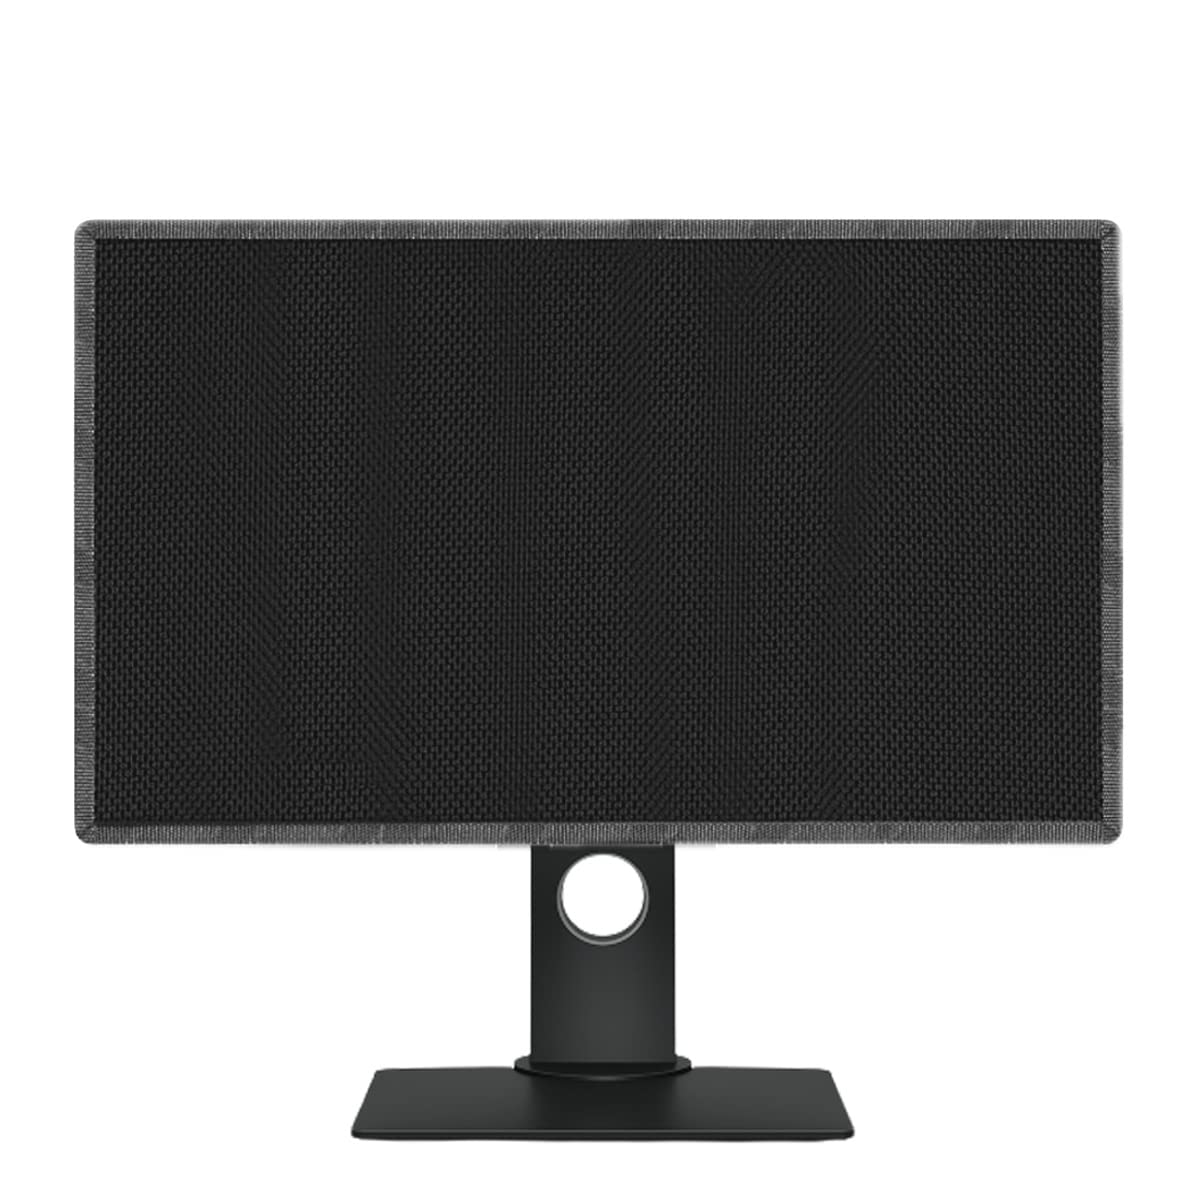 PalaP Super Premium Dust Proof Monitor Cover for DELL24 inches Monitor (Black)